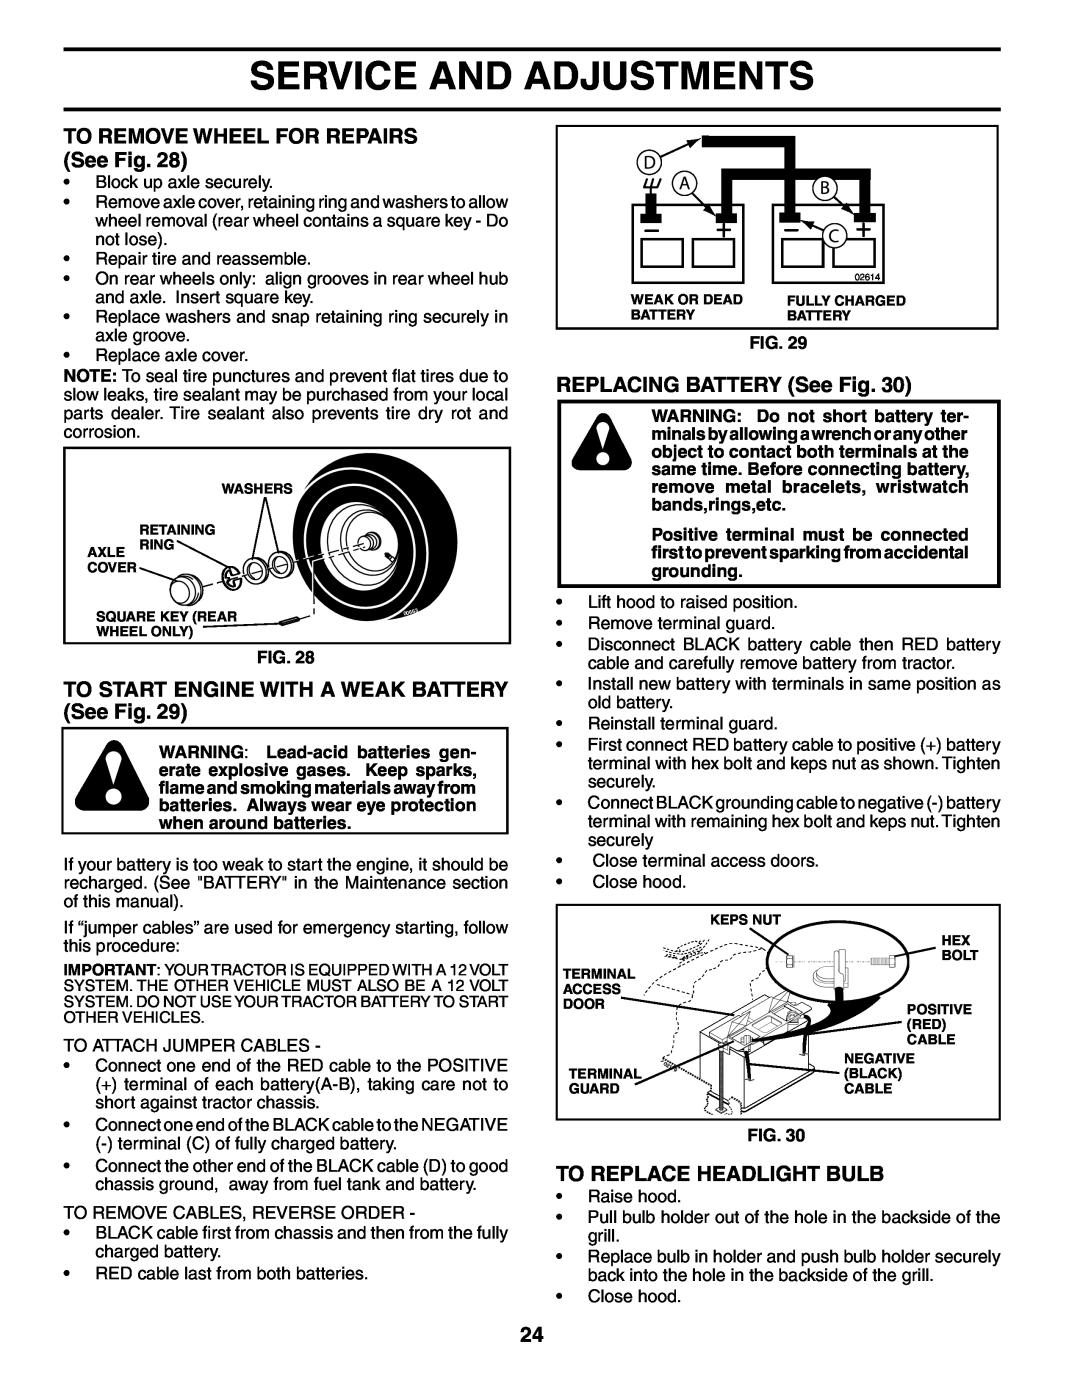 Poulan PD20PH48STB owner manual TO REMOVE WHEEL FOR REPAIRS See Fig, REPLACING BATTERY See Fig, To Replace Headlight Bulb 